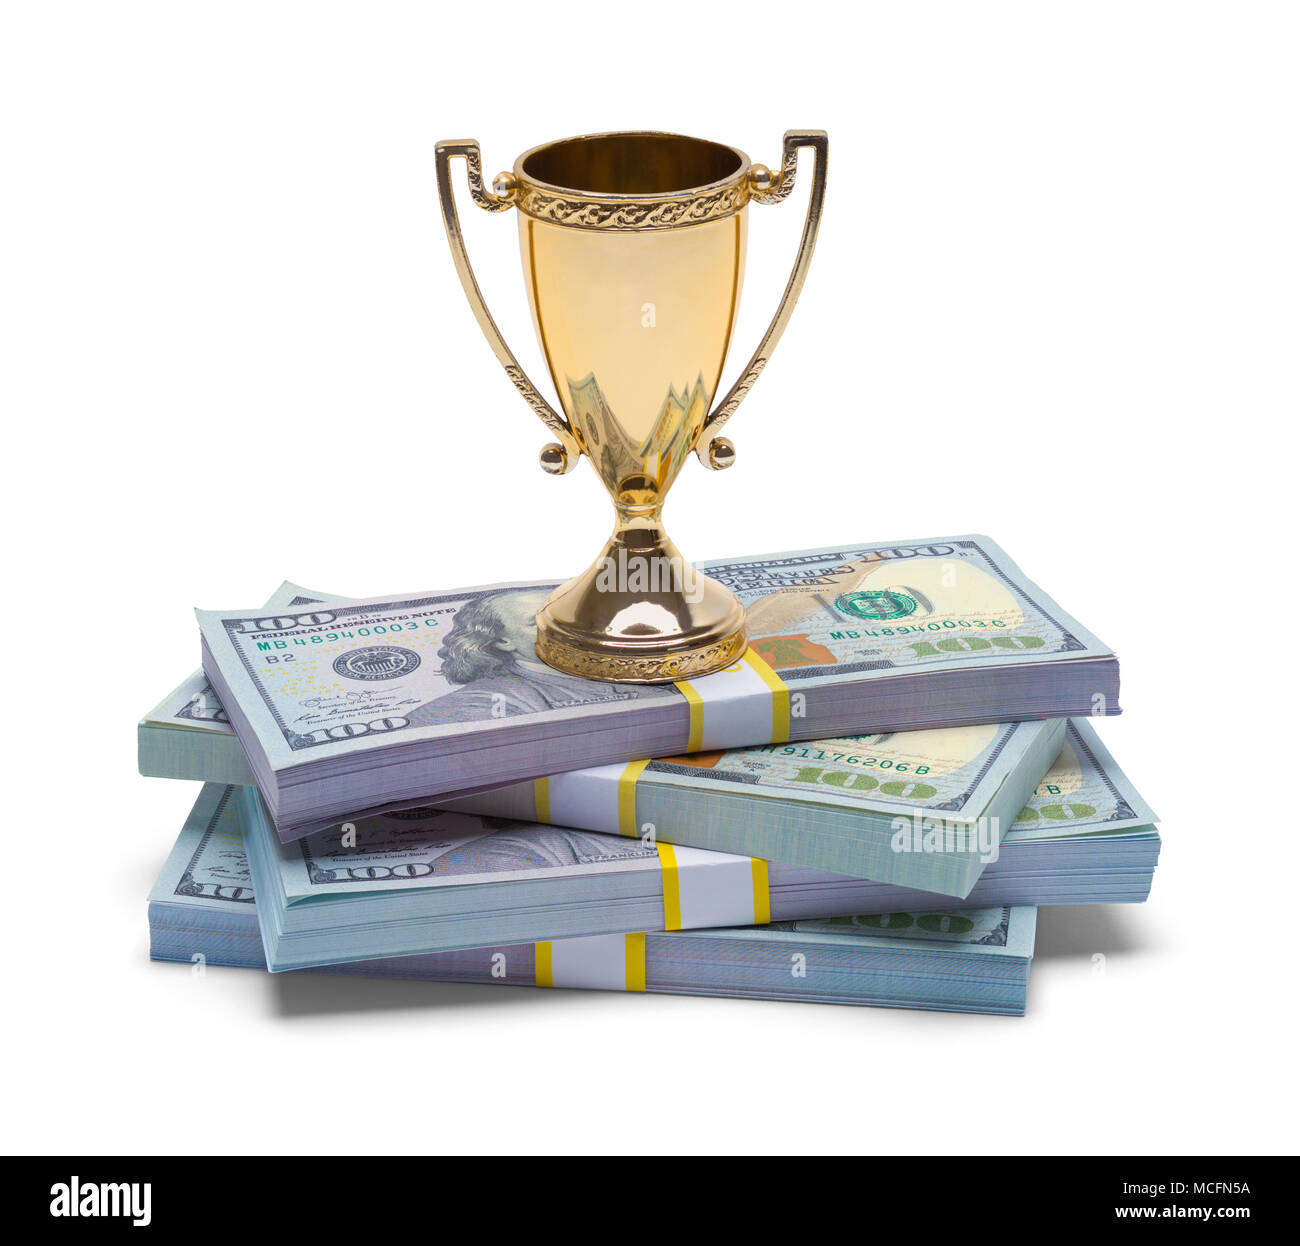 Pile of Money with a Gold Trophy Cup Isolated on a White Background. Stock Photo